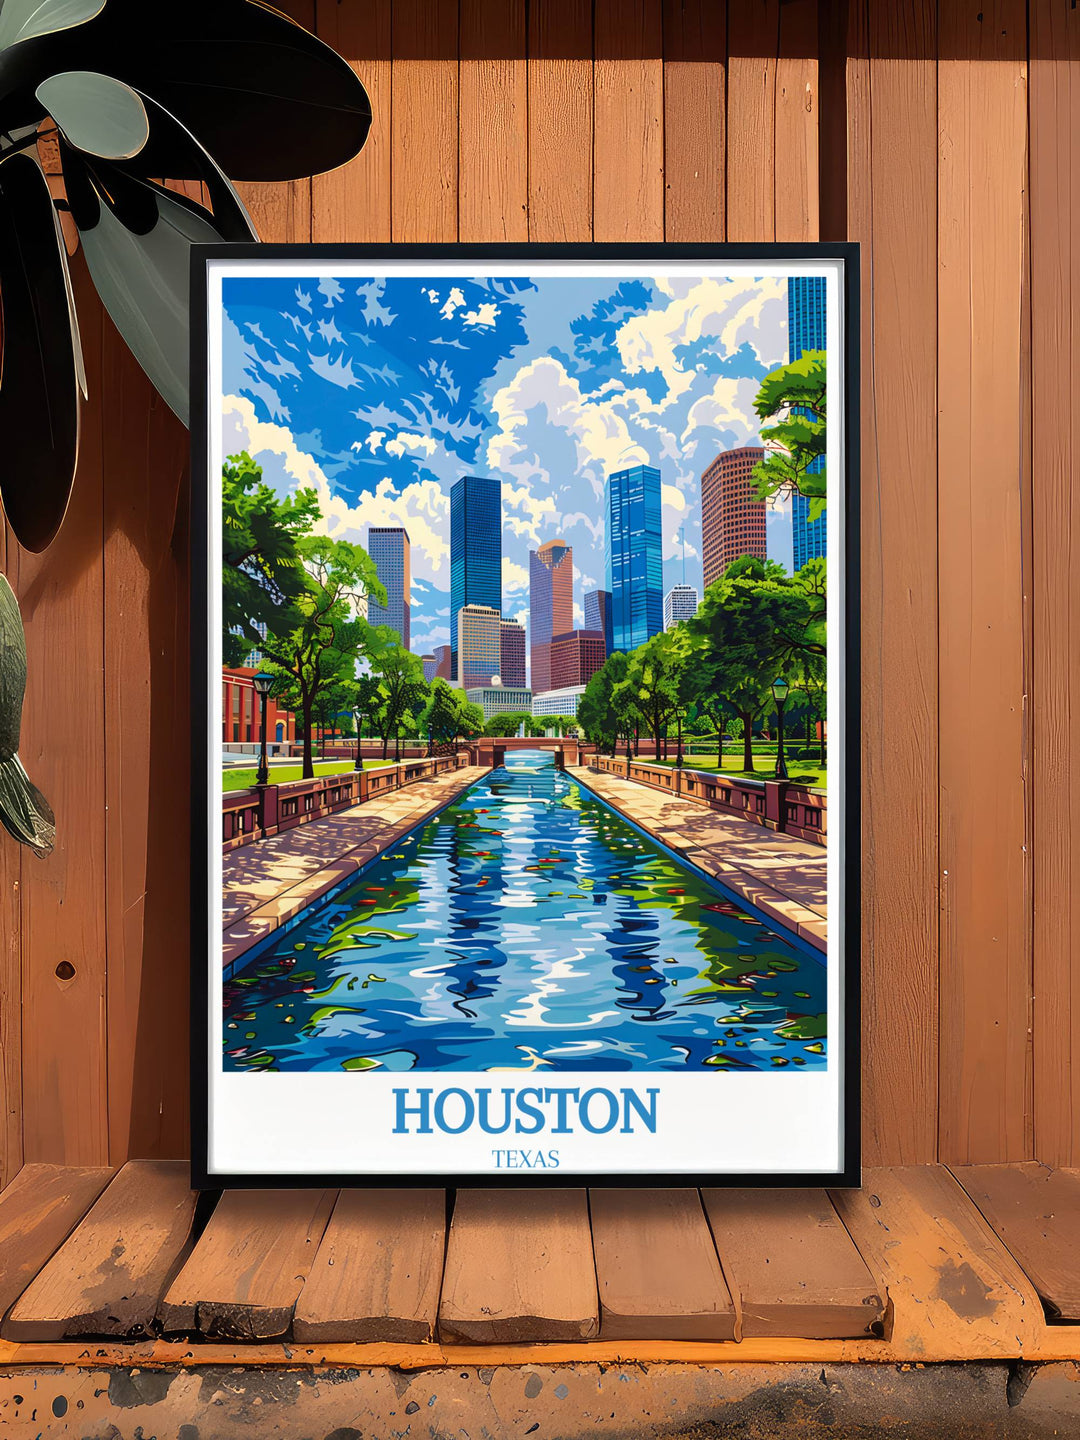 Housewarming gift idea: a beautifully framed Houston Texas Travel Print, depicting iconic scenes from around the city, perfect for new homeowners or as a memorable gift.